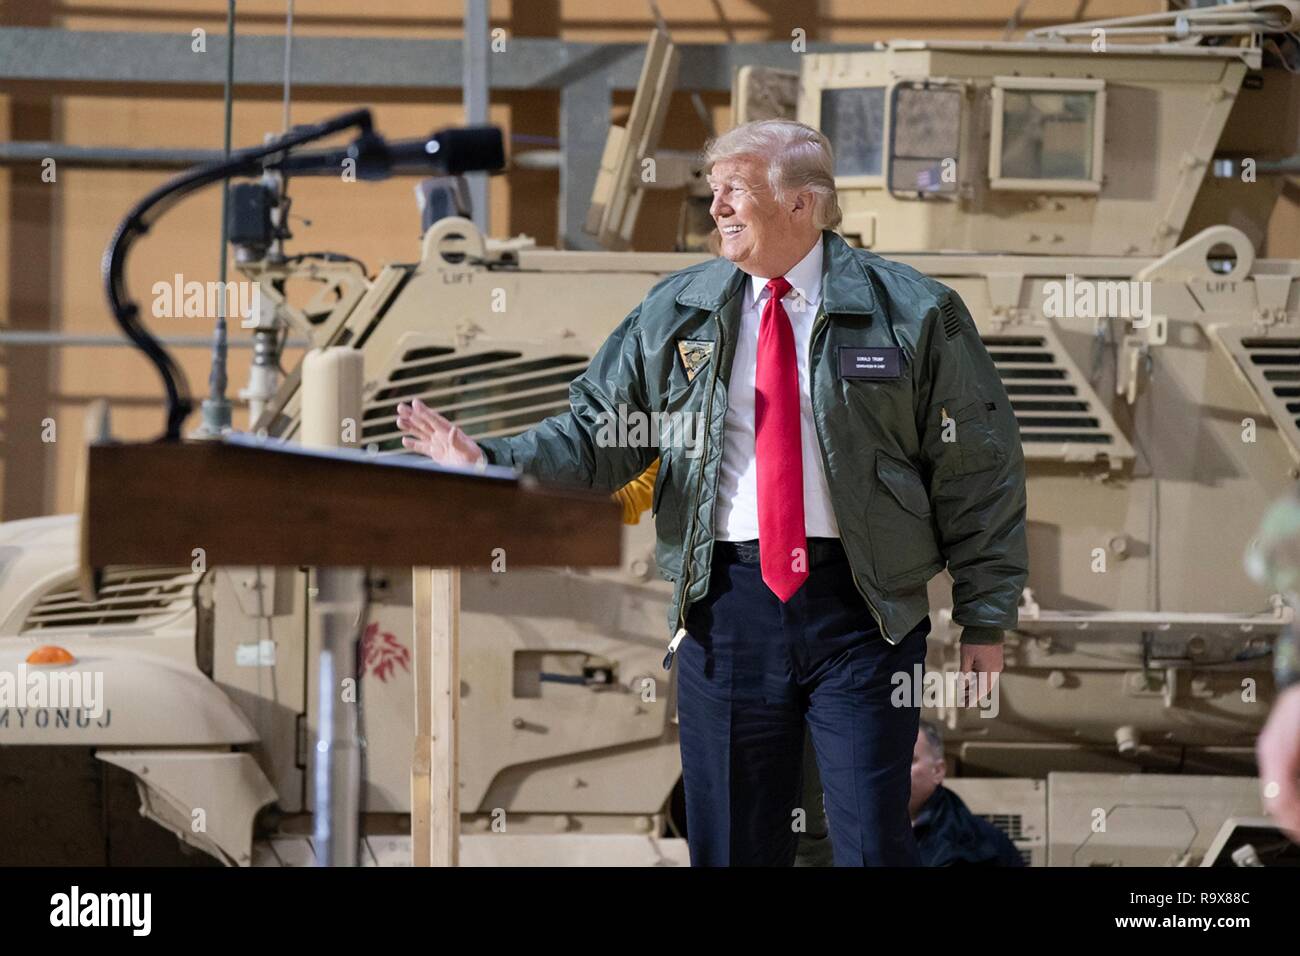 U.S. President Donald Trump addresses U.S. service members during a surprise visit to Al Asad Air Base December 26, 2018 in Al Anbar, Iraq. The president and the first lady spent about three hours on Boxing Day at Al Asad, located in western Iraq, their first trip to visit troops overseas since taking office. Stock Photo